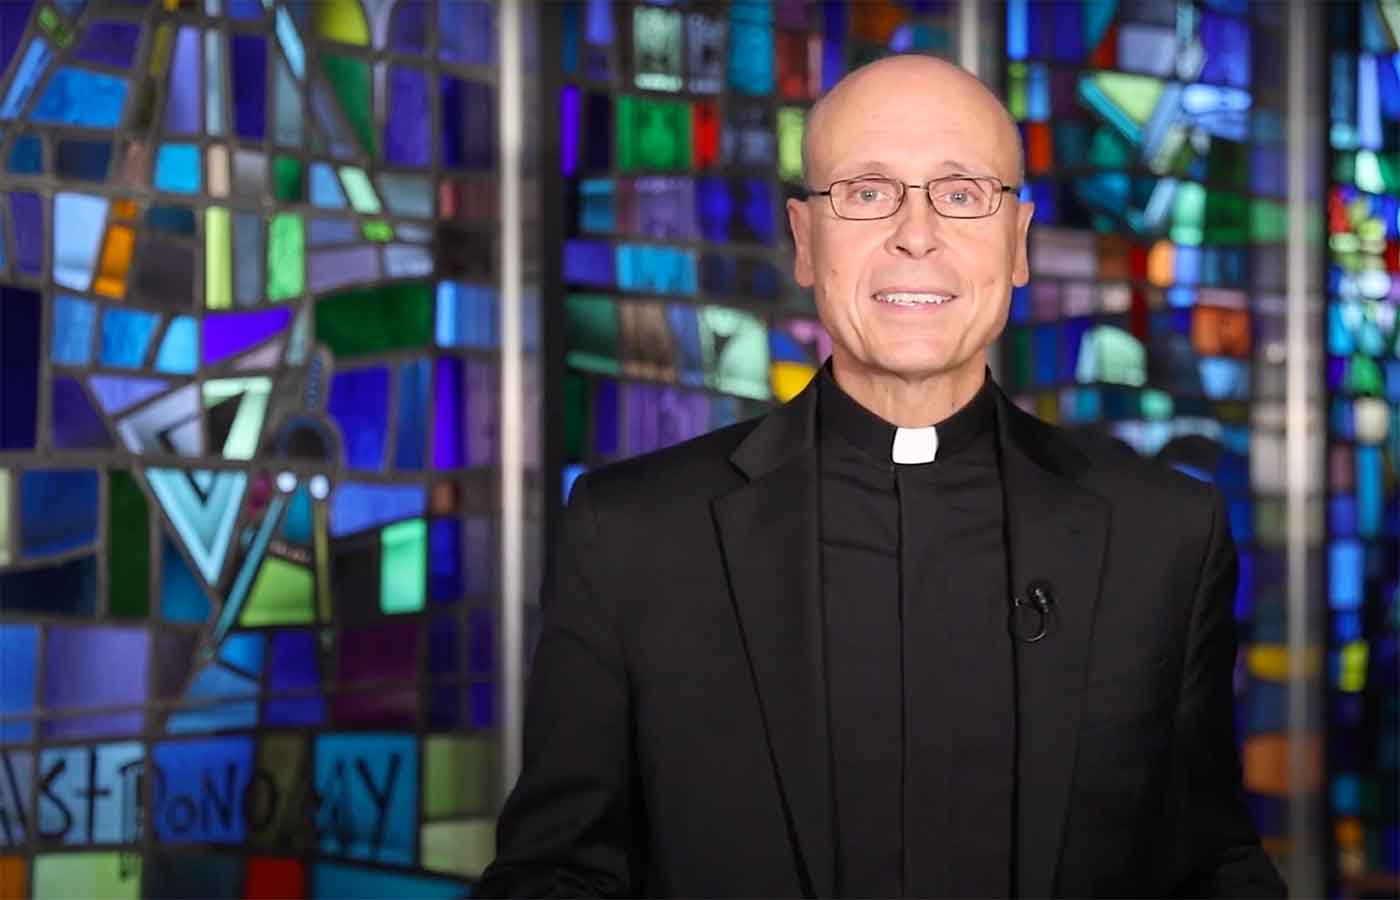 father jim speaking in front of stained glass windows